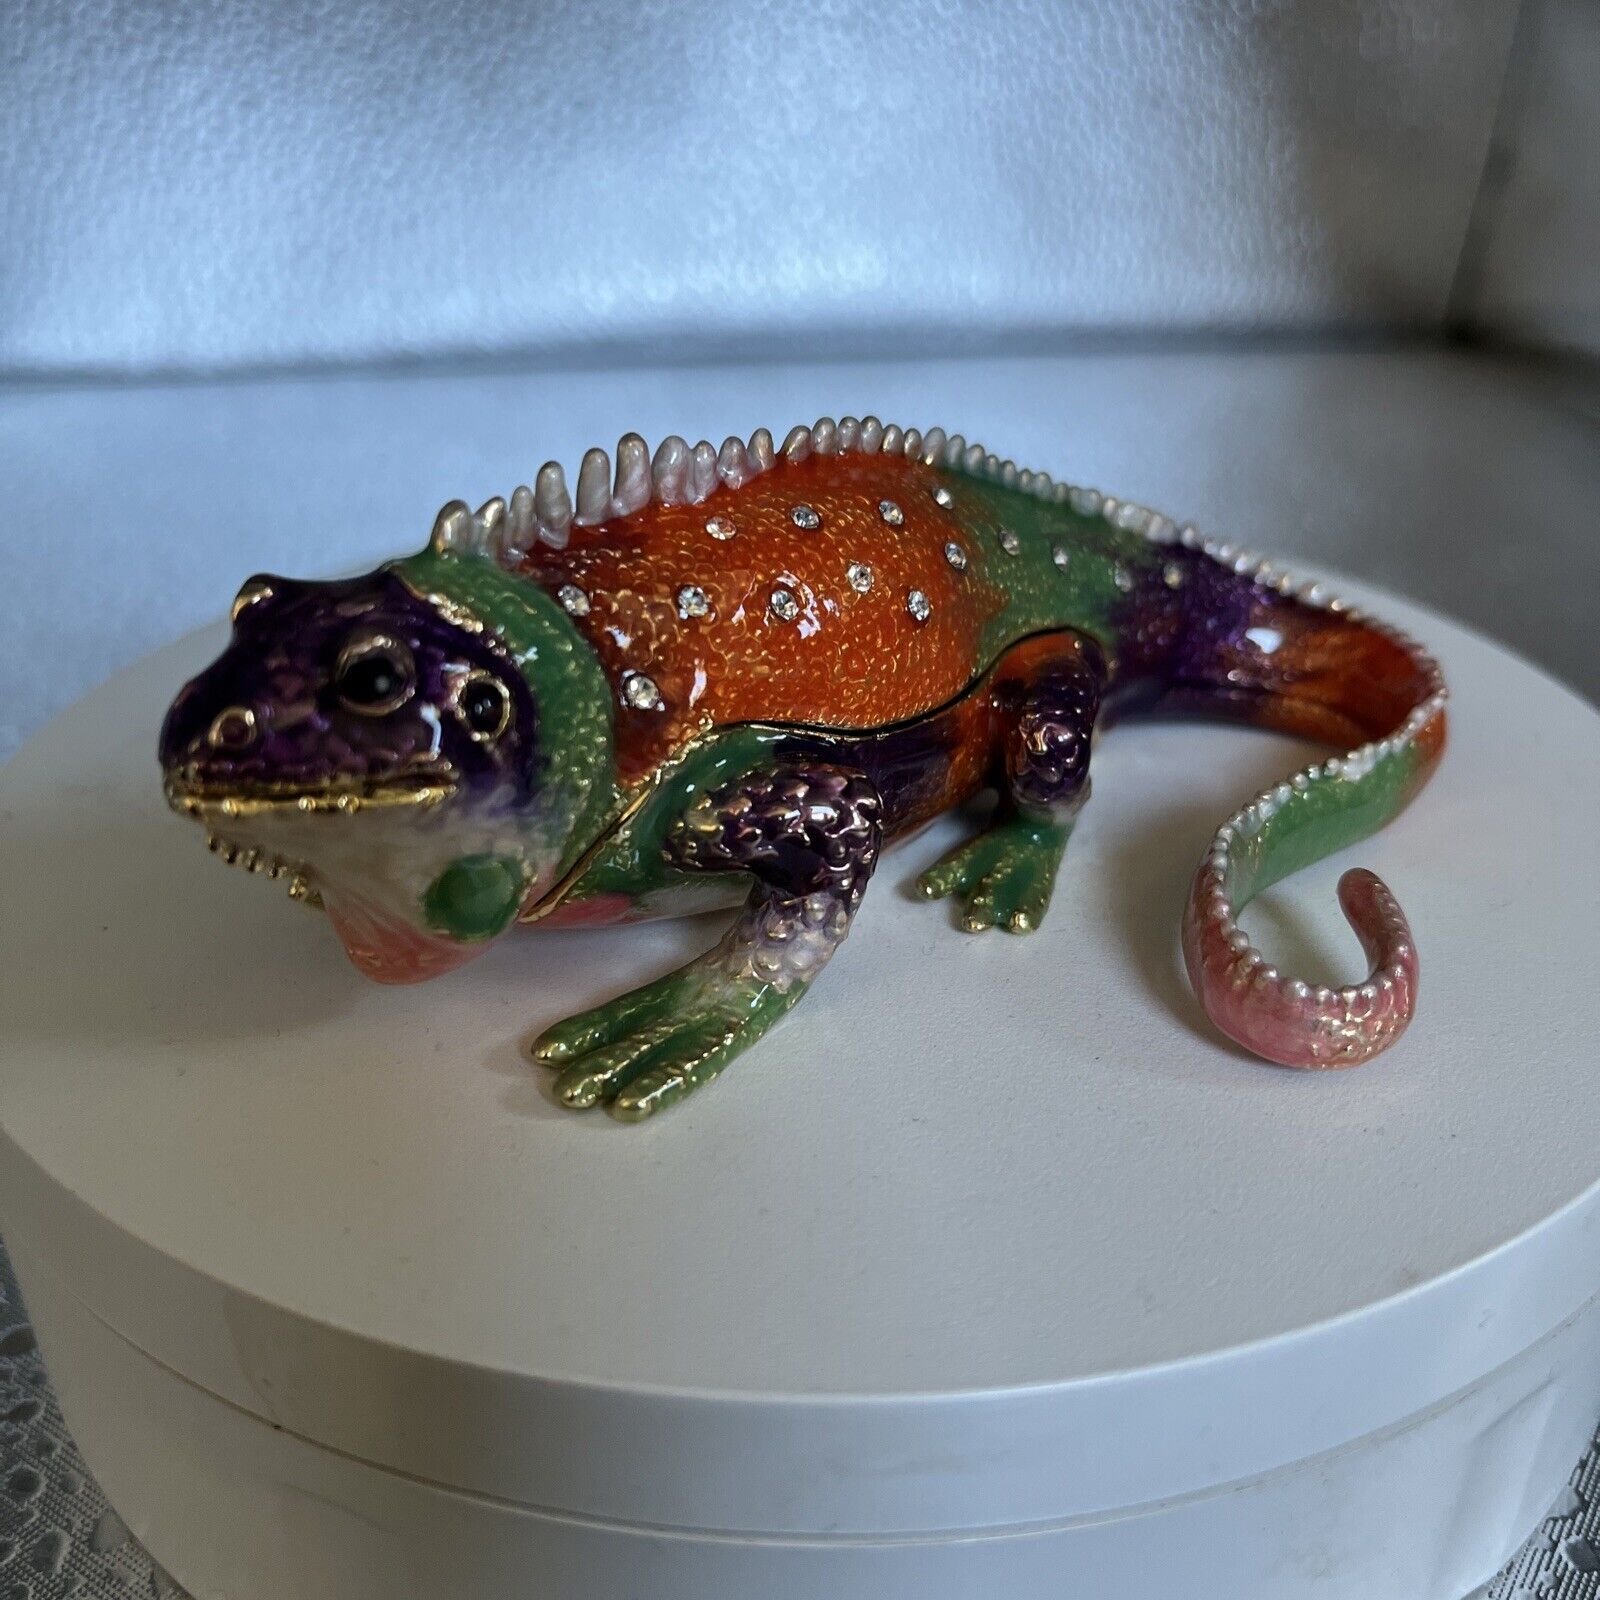 COLORFUL IGUANA TRINKET BOX BY KEREN KOPAL, HARD TO FIND, COLLECTION PIECE